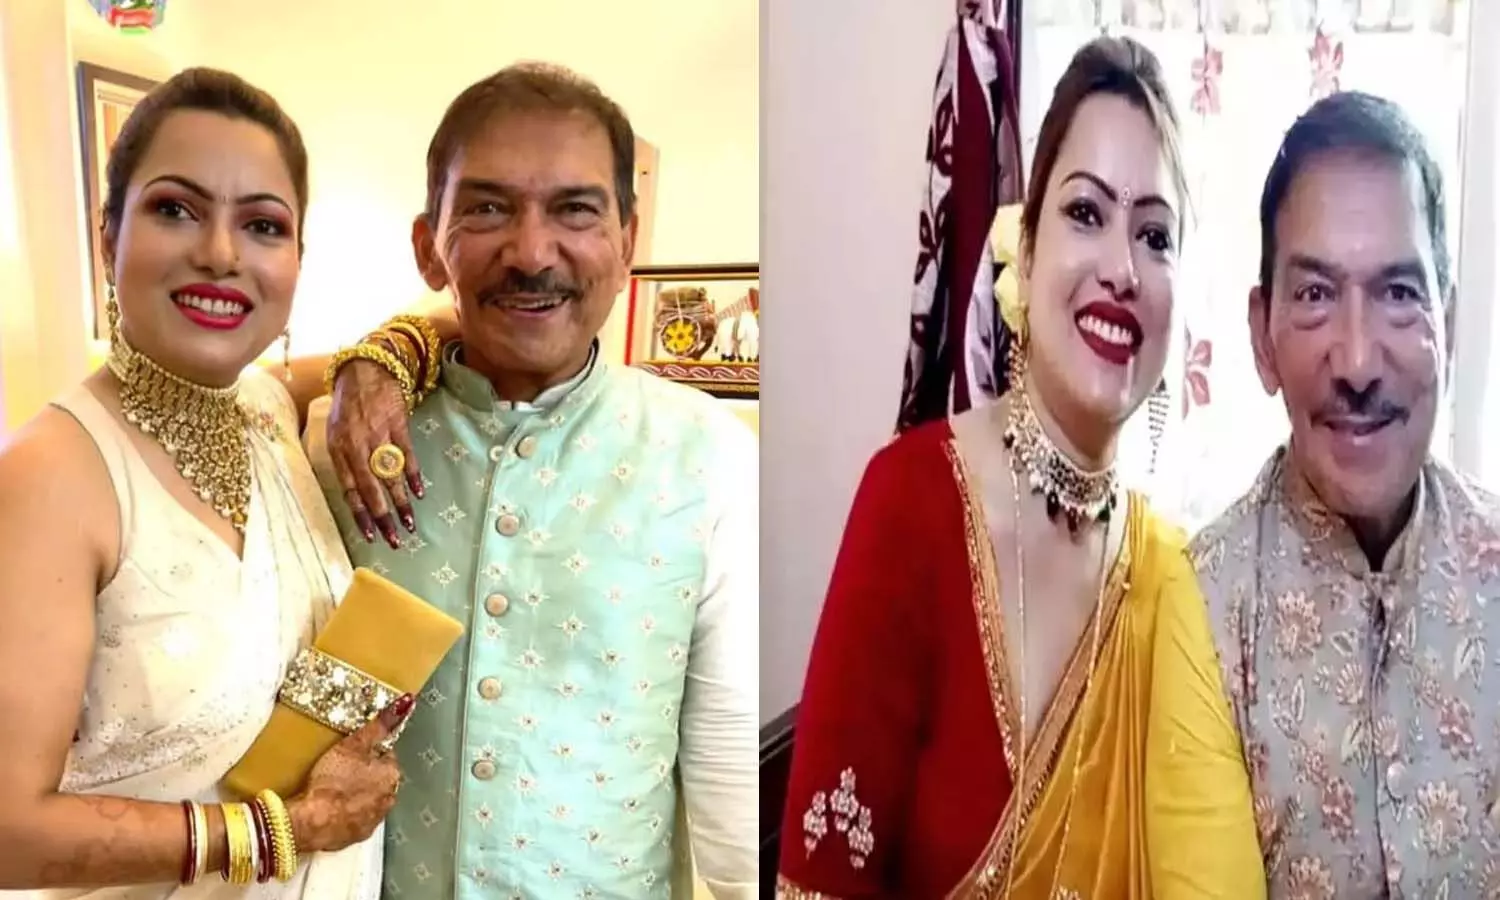 EX cricketer Arun Lal will celebrate honeymoon with 28 years younger bride, their love story is very interesting